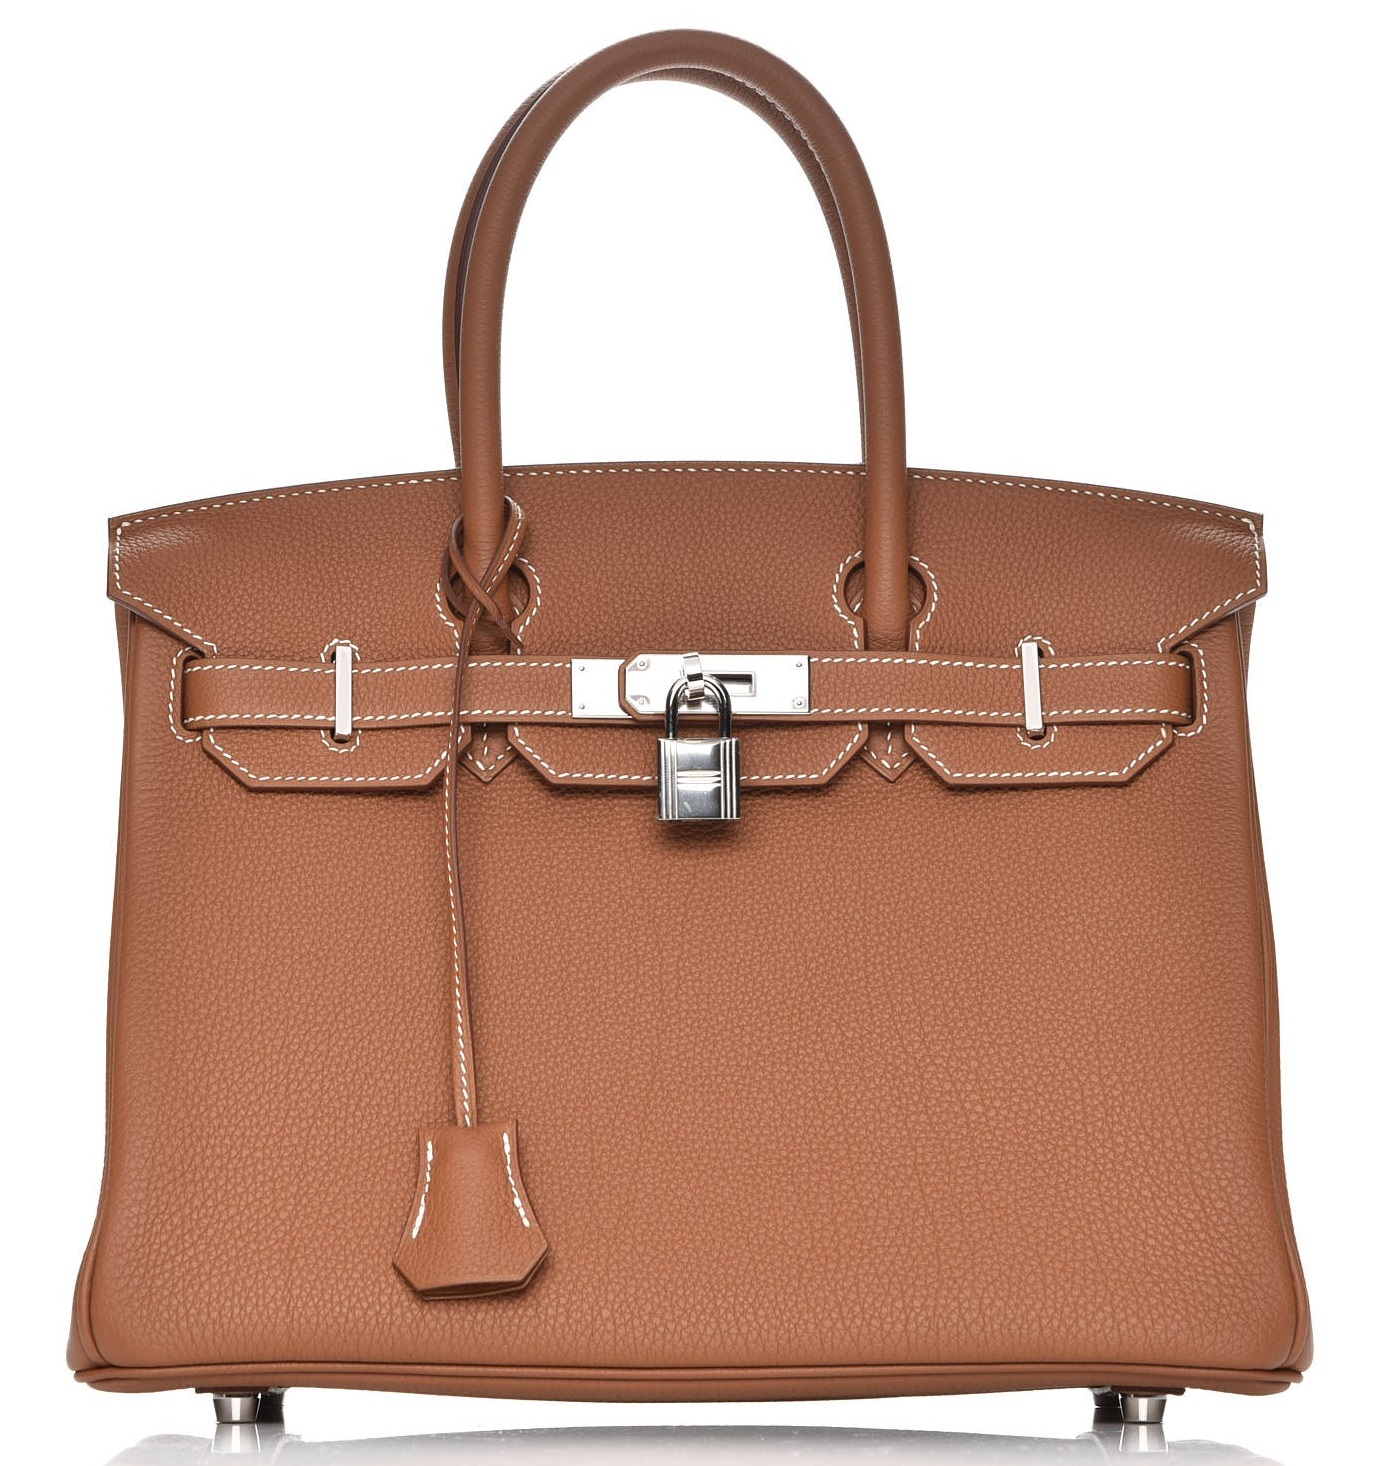 Can women that own a Hermes Birkins distinguish a fake one? - Quora